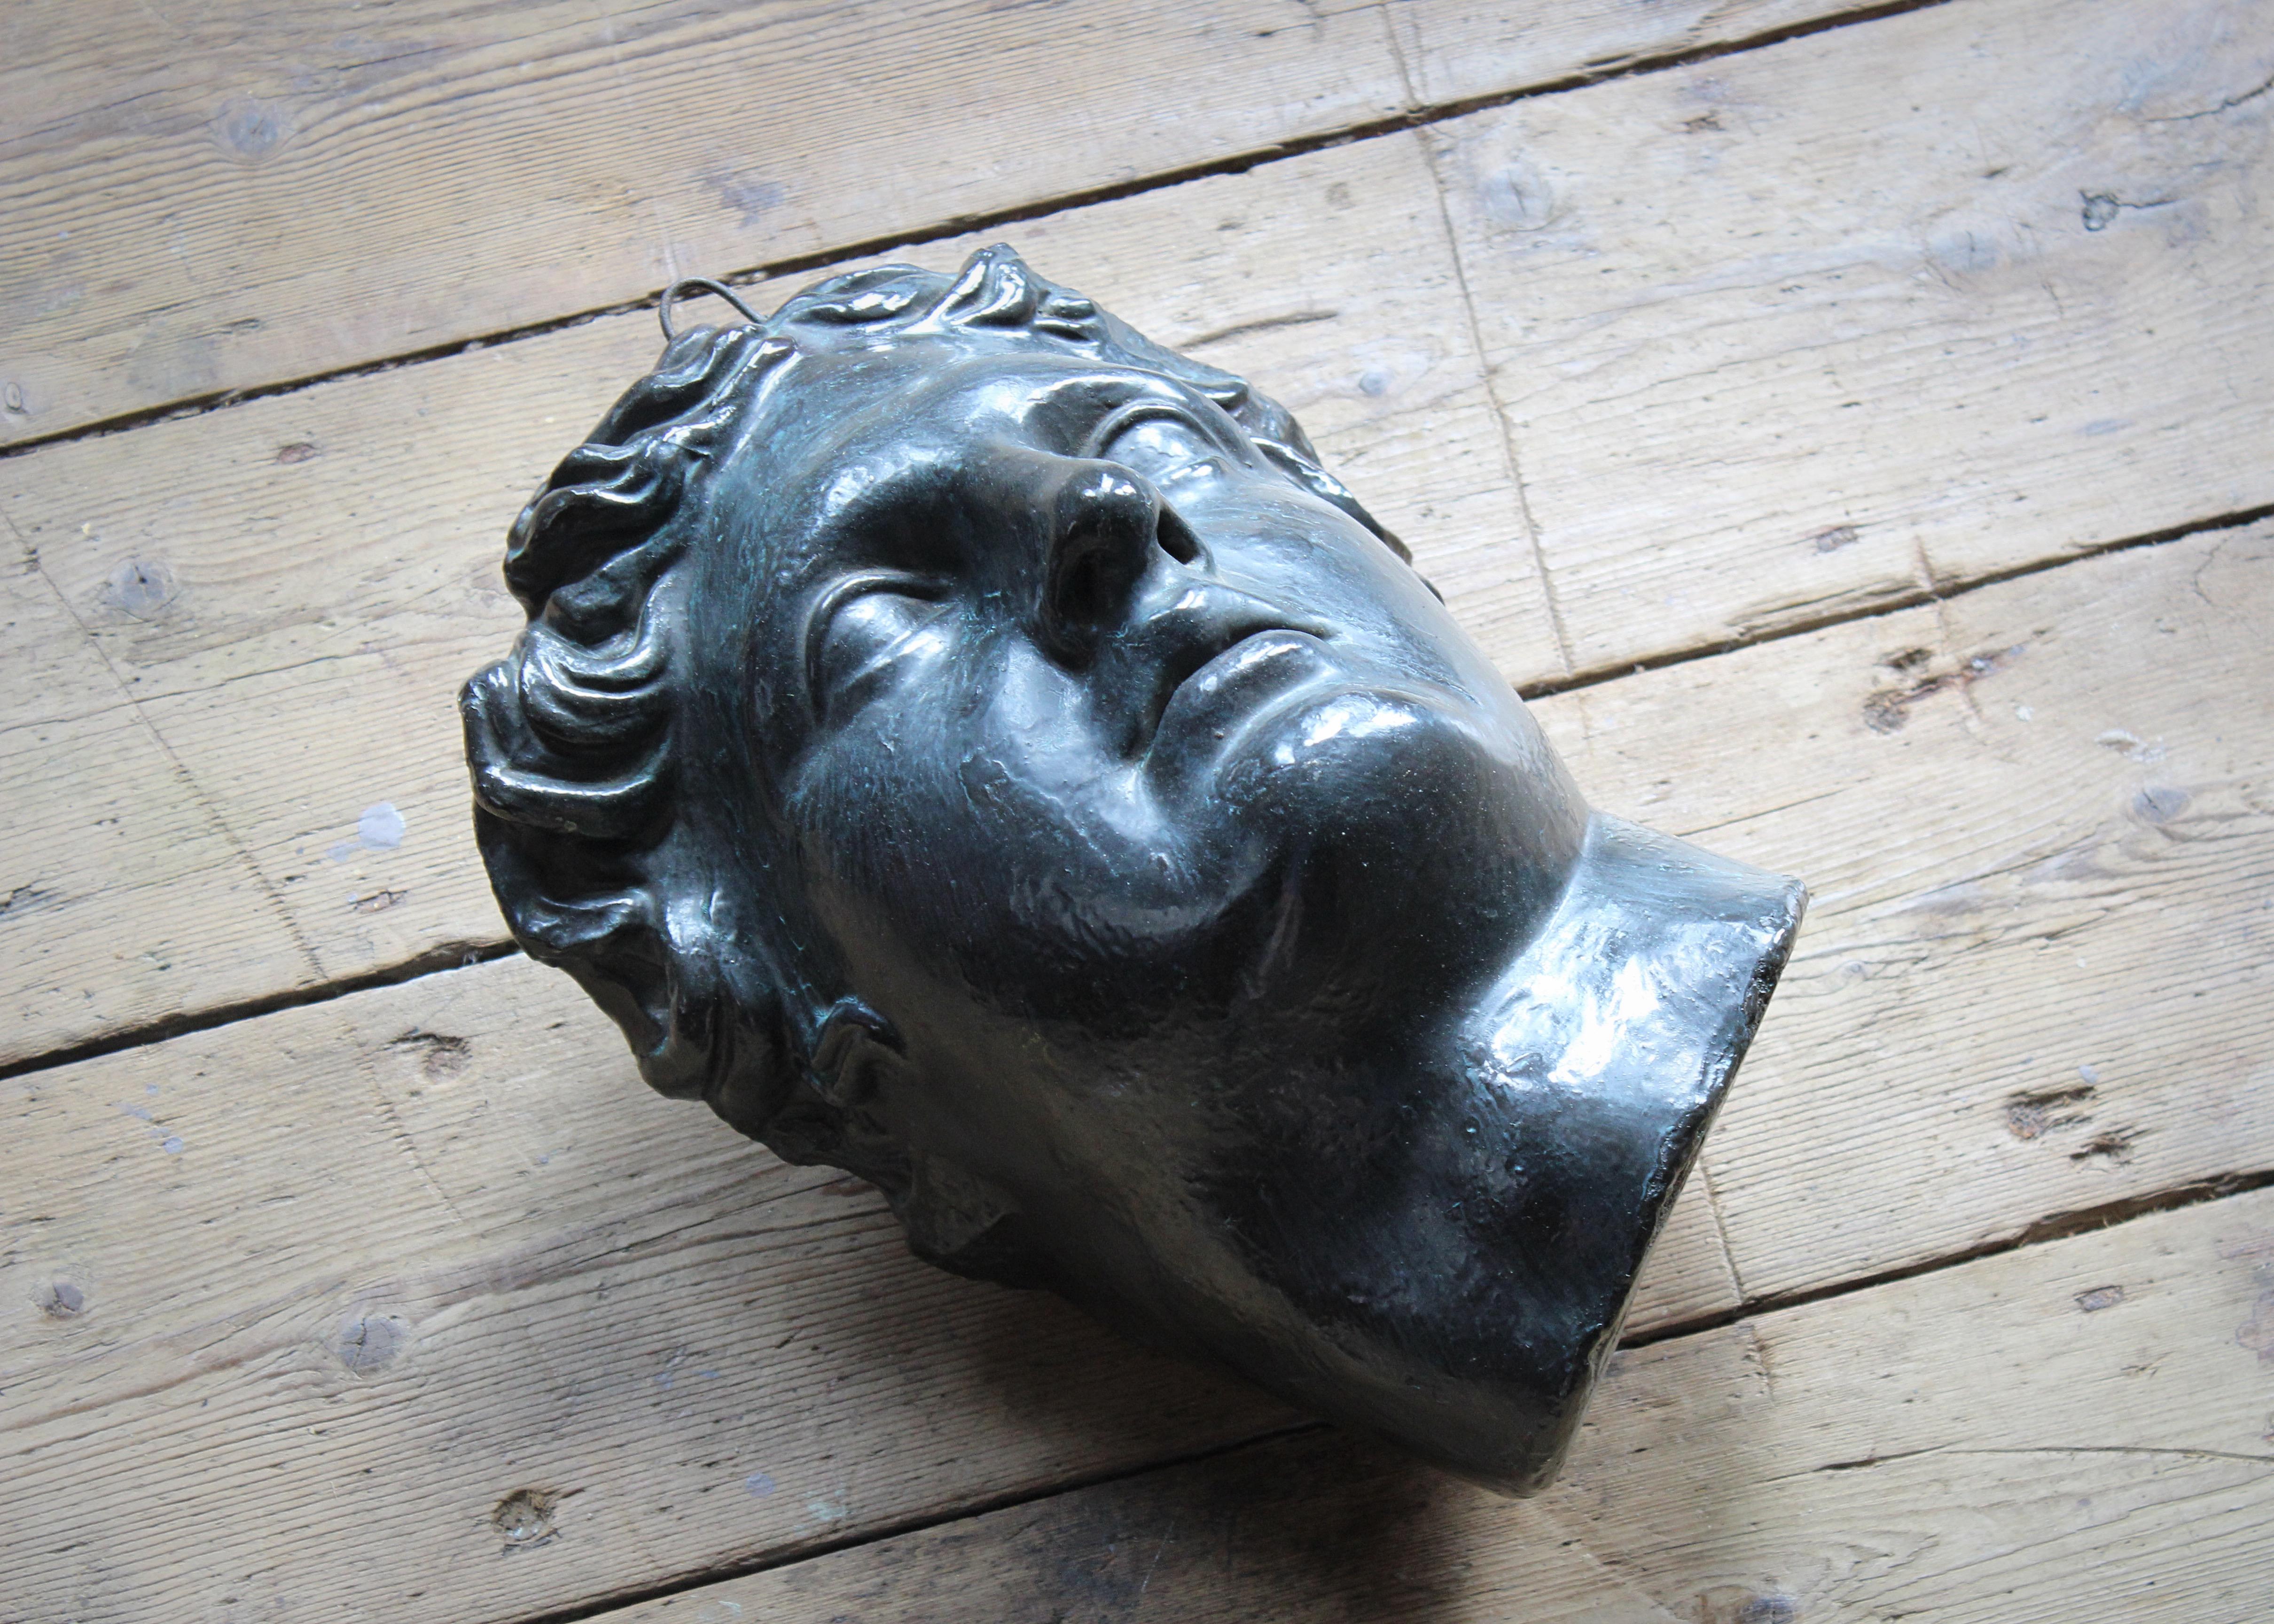 A elegant D Brucciani plaster cast classical mask

Domenico Brucciani was born in Lucca, Italy in 1815. He moved to London where he established a Gallery of Casts in Covent Garden by 1837. This business was one of many which emerged in the 19th